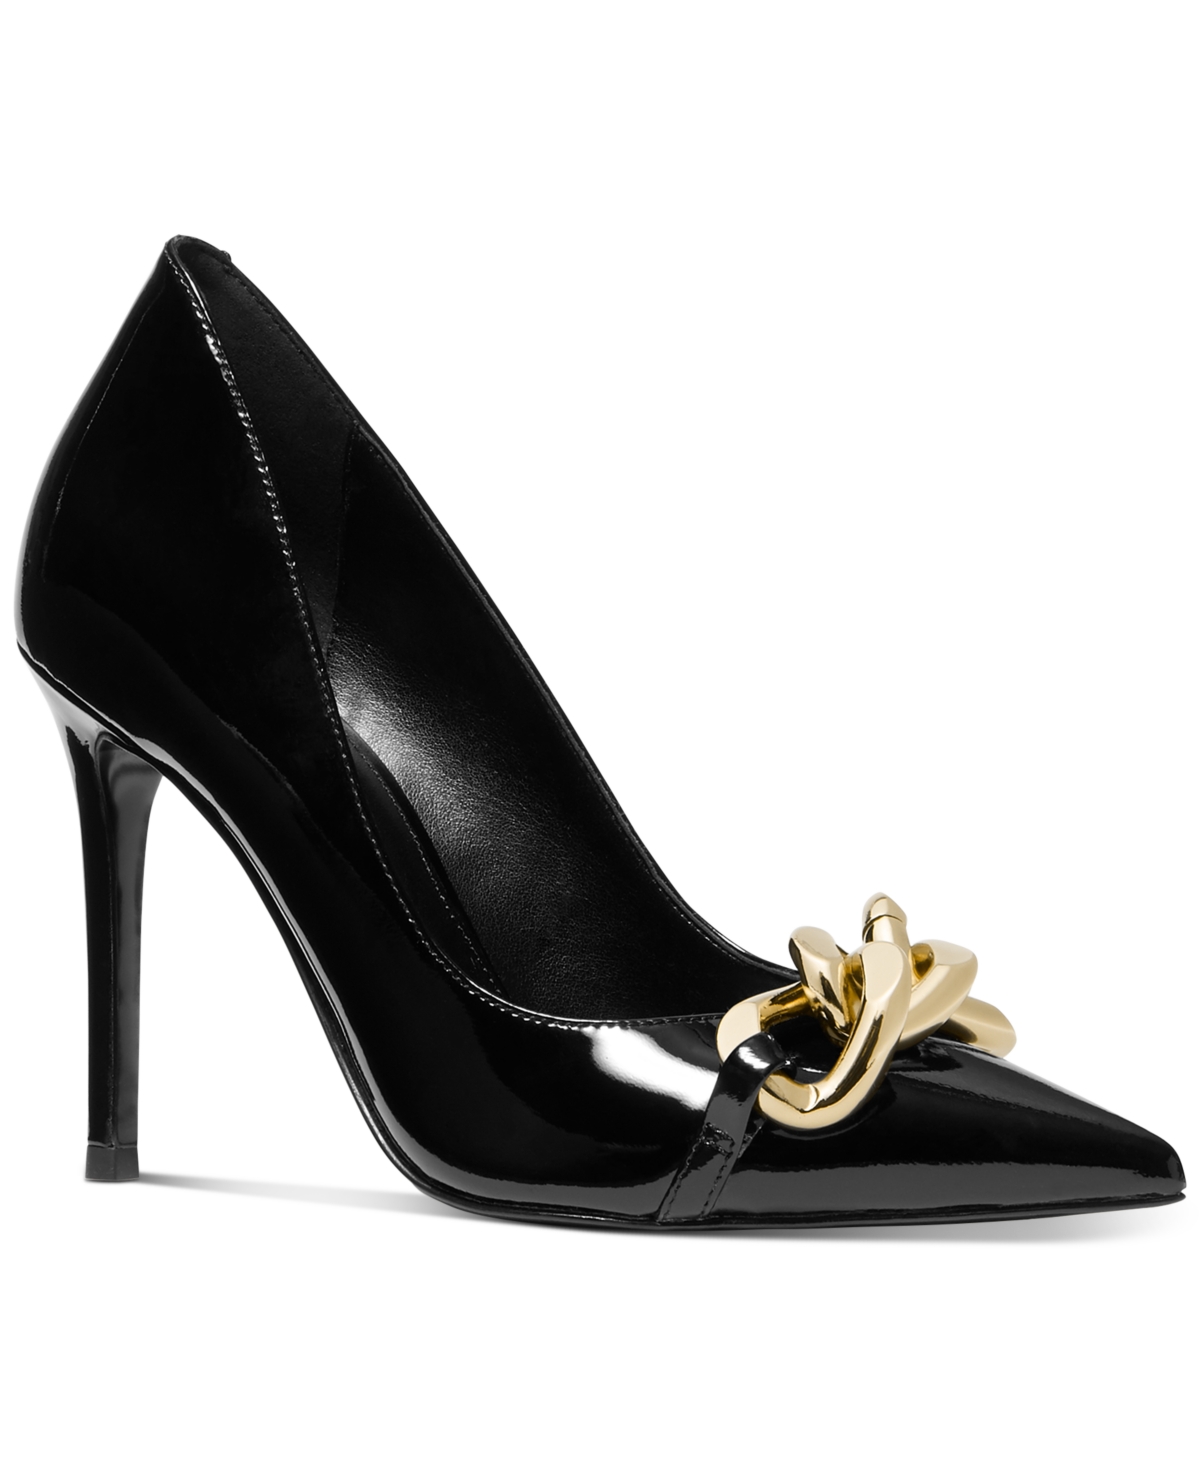 UPC 195512621161 product image for Michael Michael Kors Women's Scarlett Pointed-Toe Chain Pumps Women's Shoes | upcitemdb.com